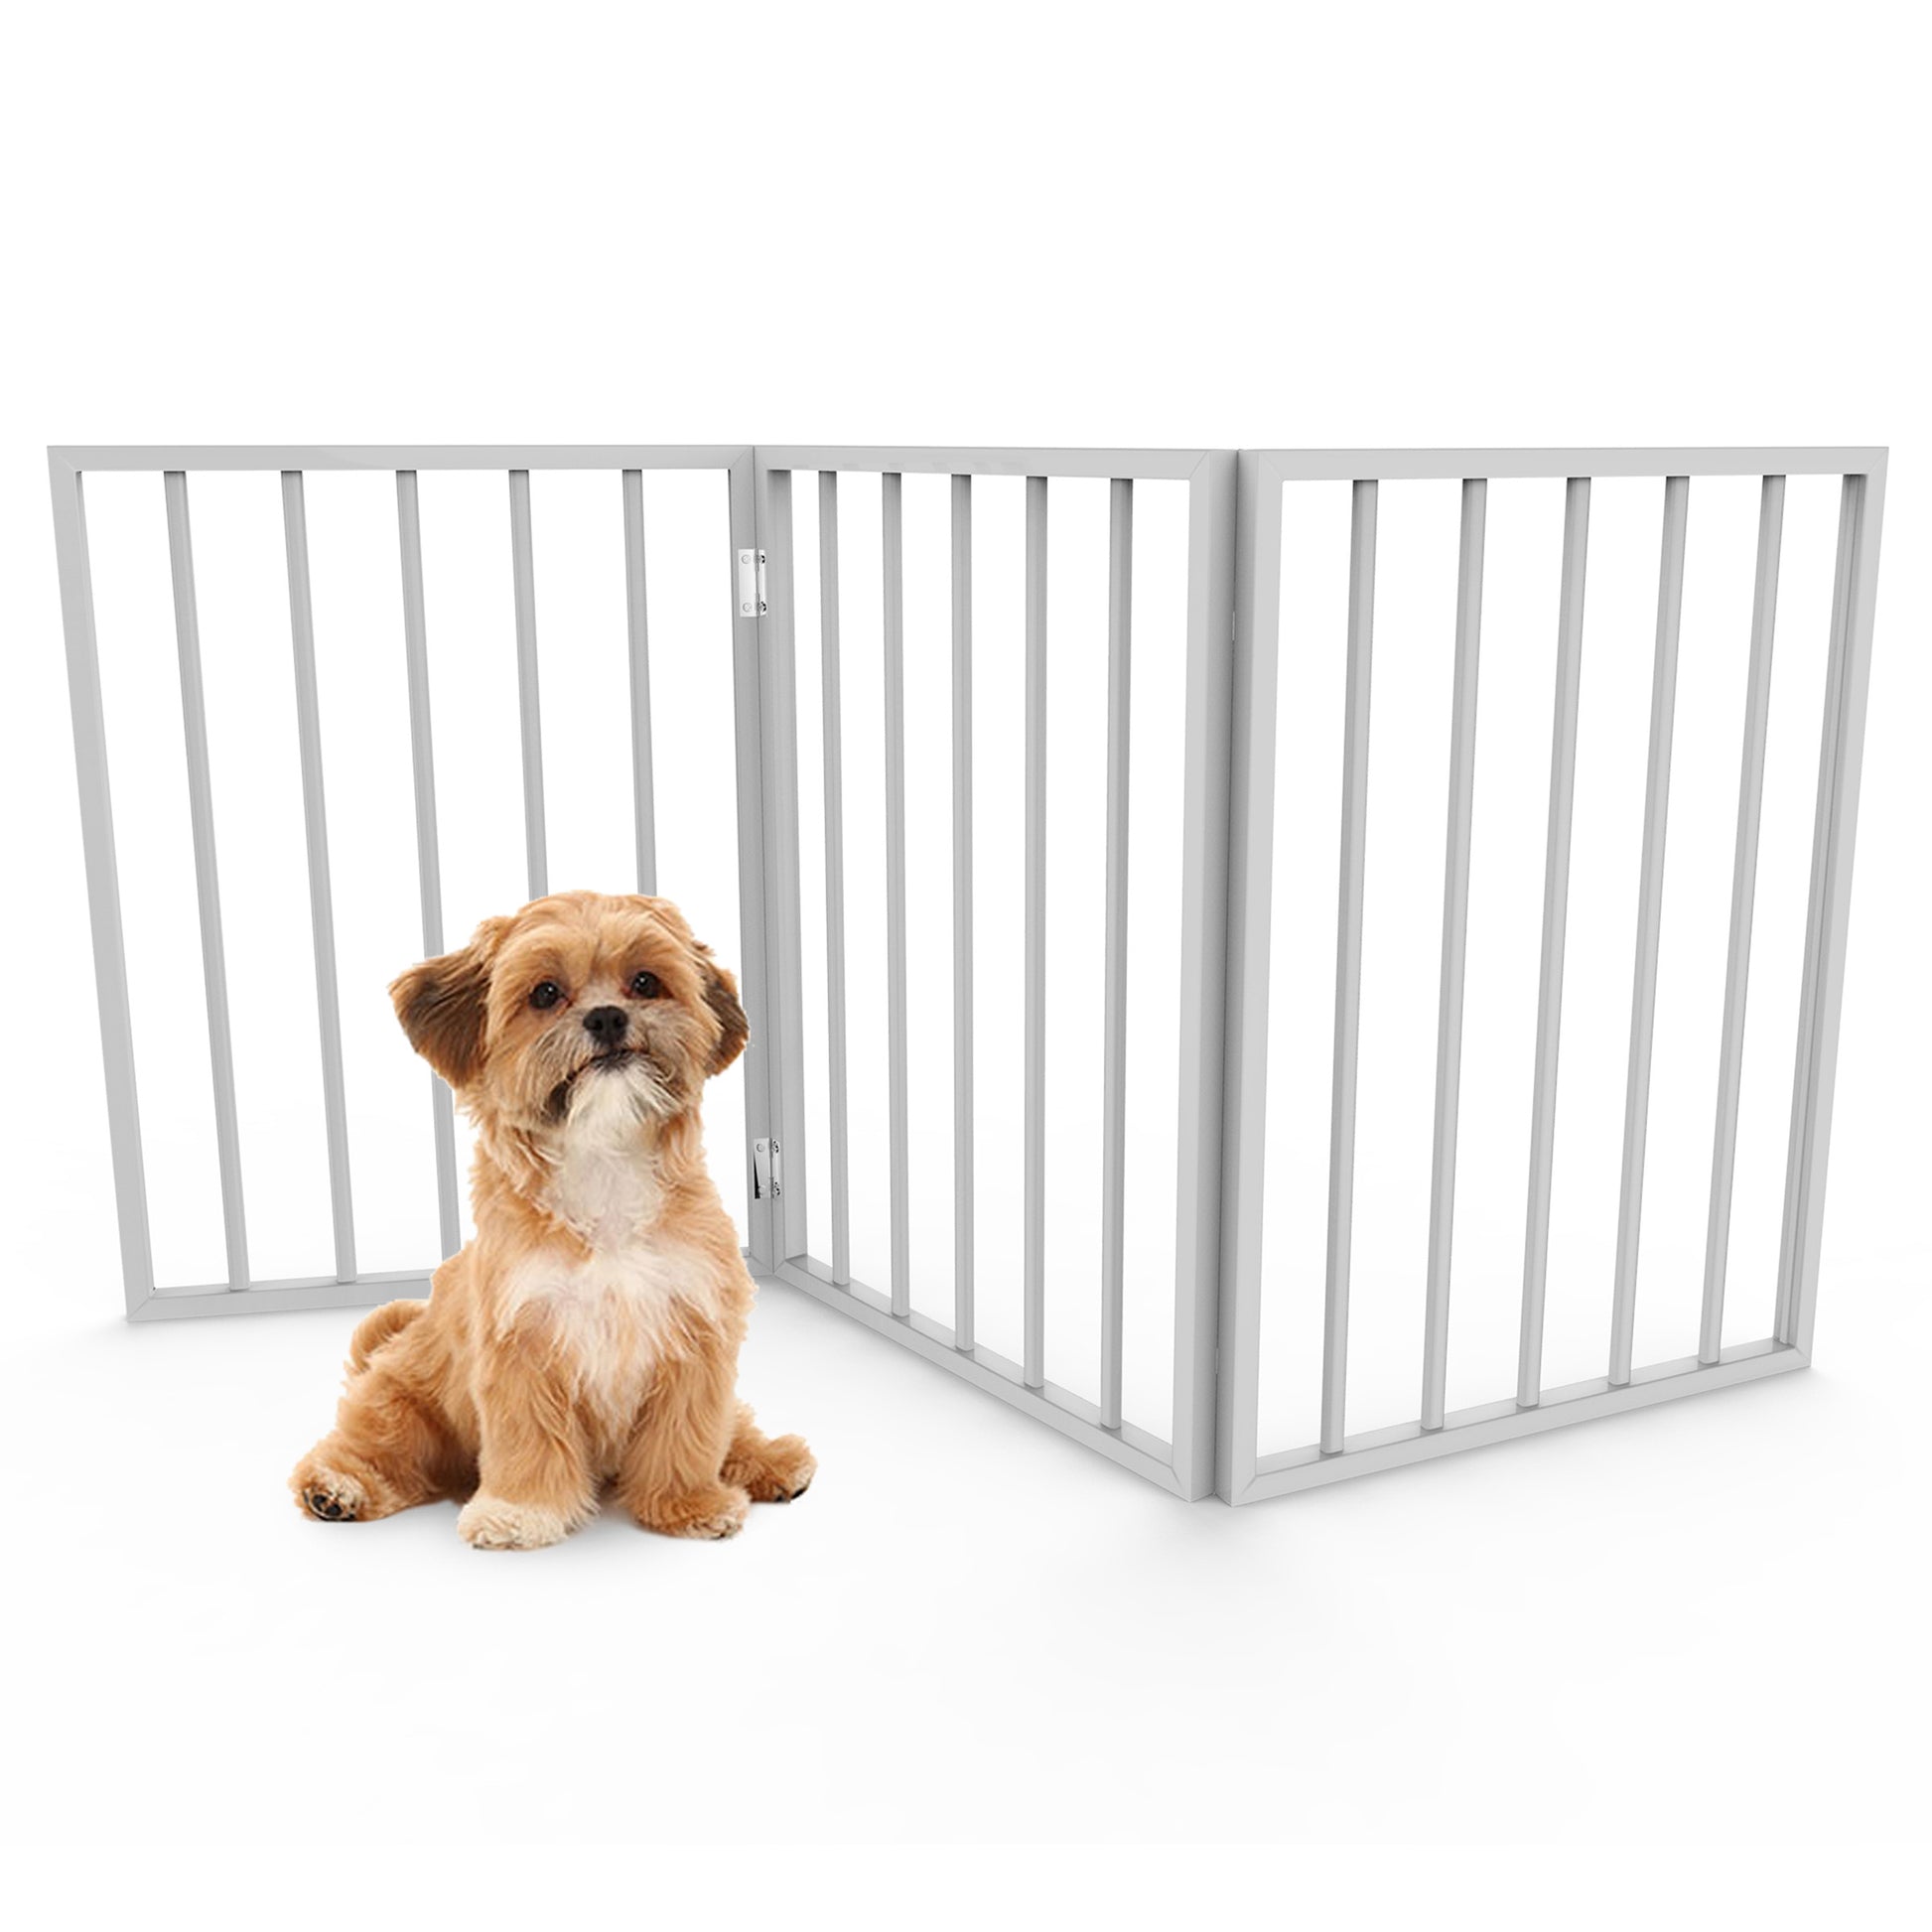 Obedient and patient puppy waits outside of a pet gate.  